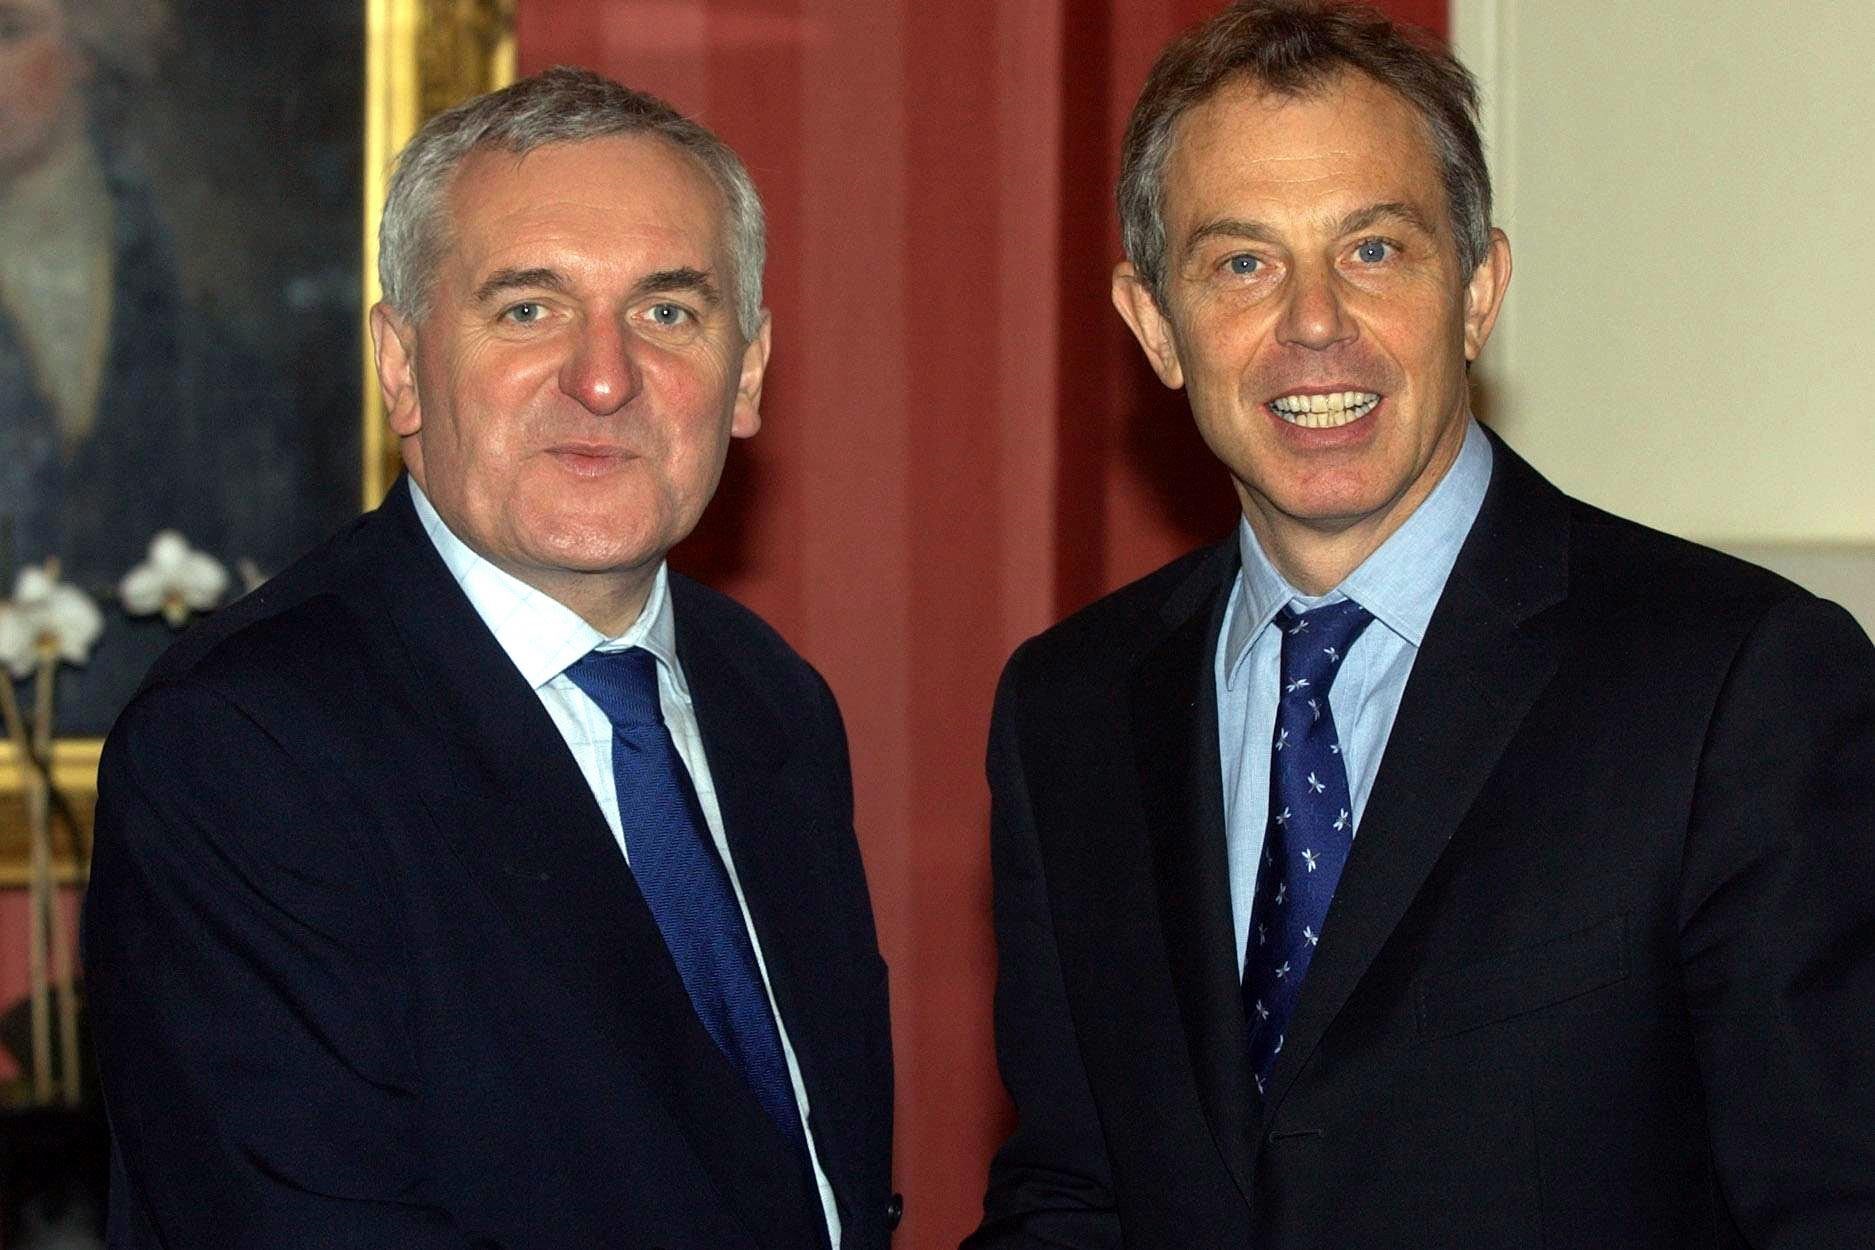 The document said there was a good working relationship between former Taoiseach Bertie Ahern and Tony Blair (Matthew Fearn/PA)